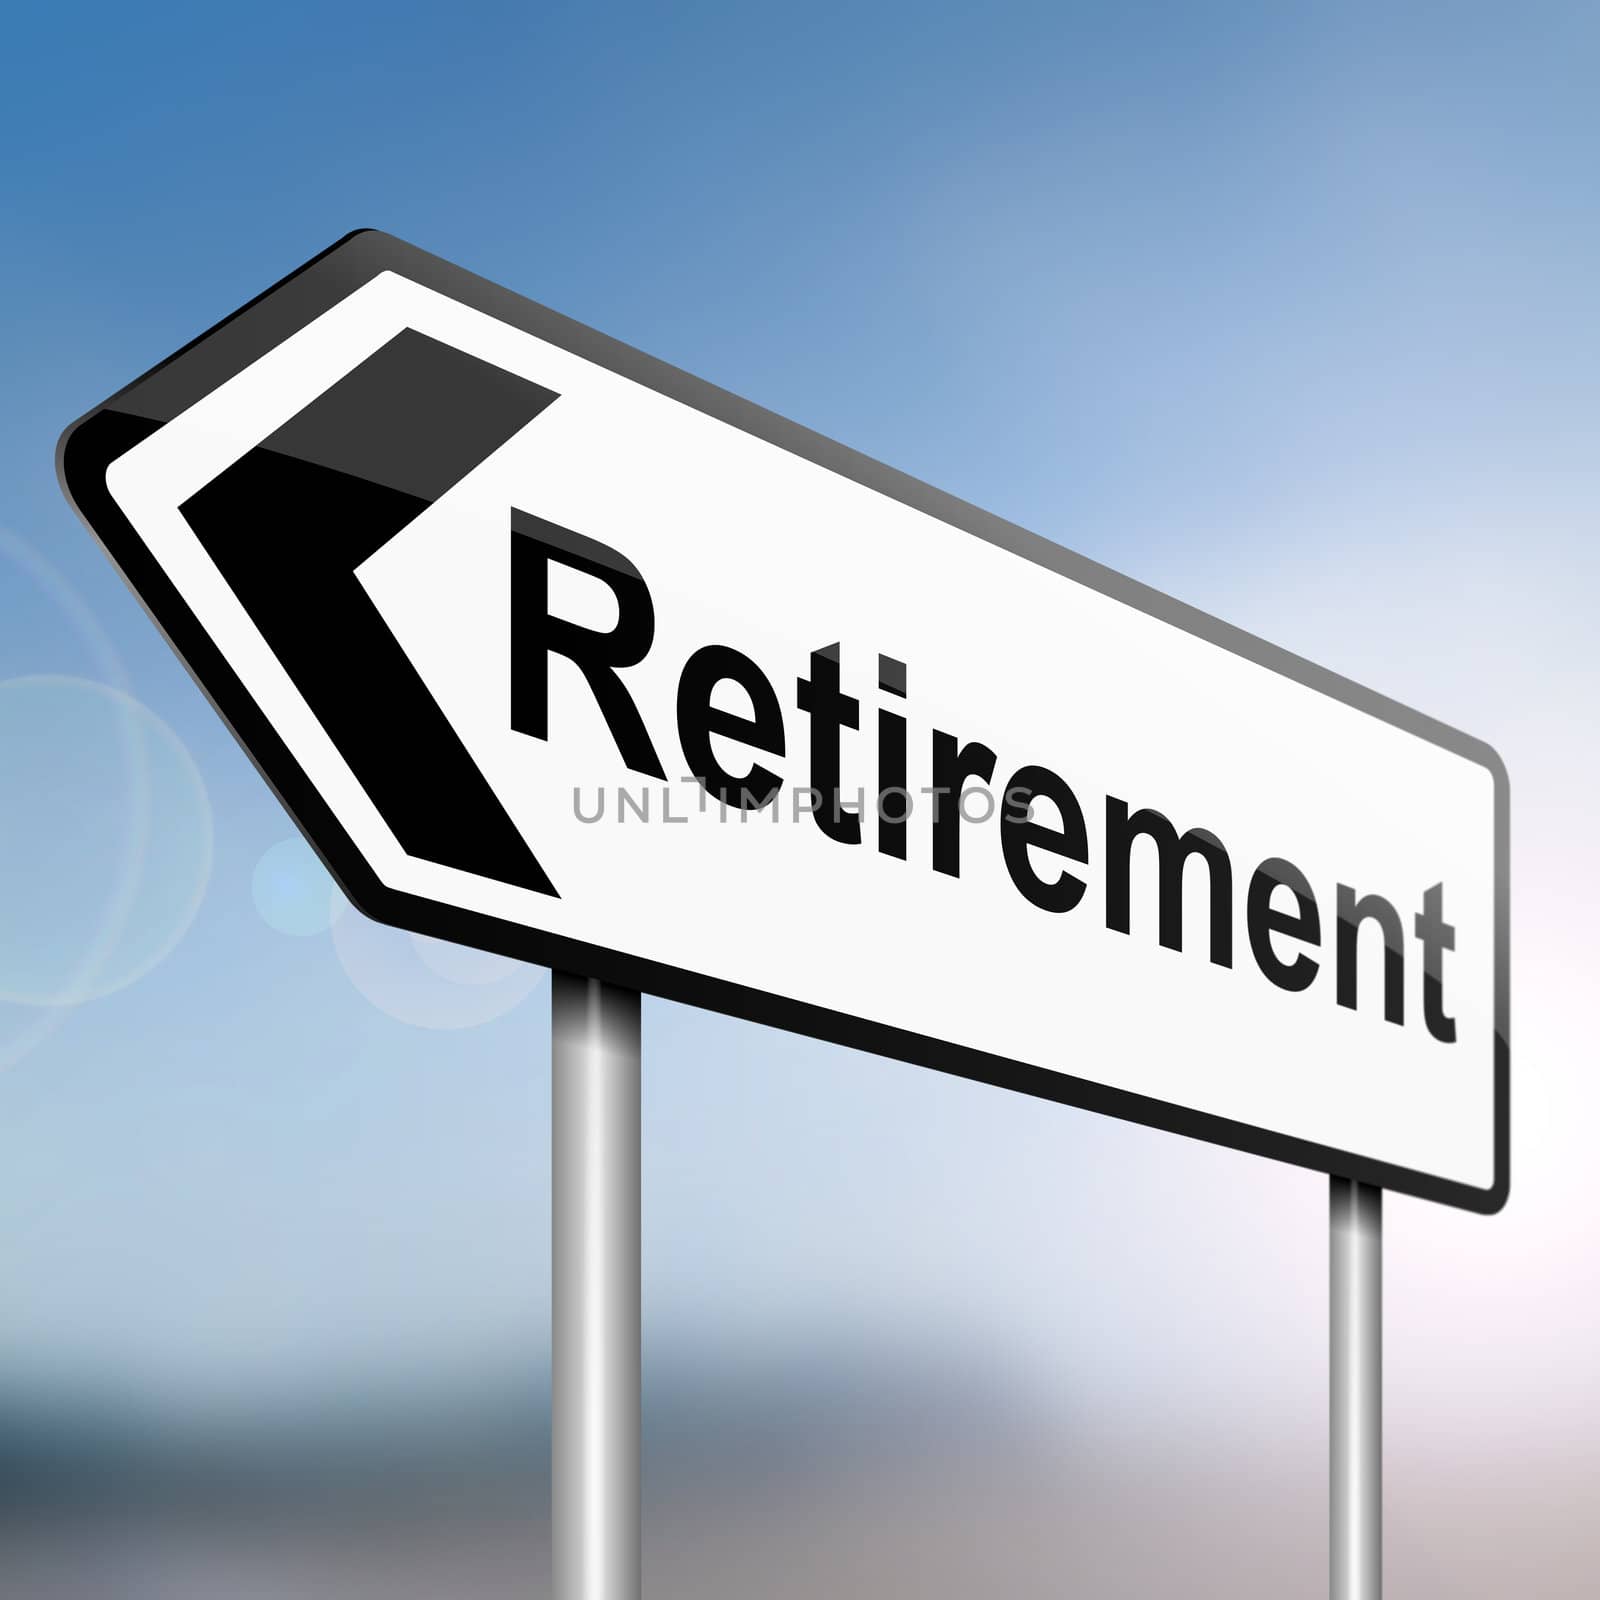 illustration depicting a sign post with directional arrow containing a retirement concept. Blurred background.